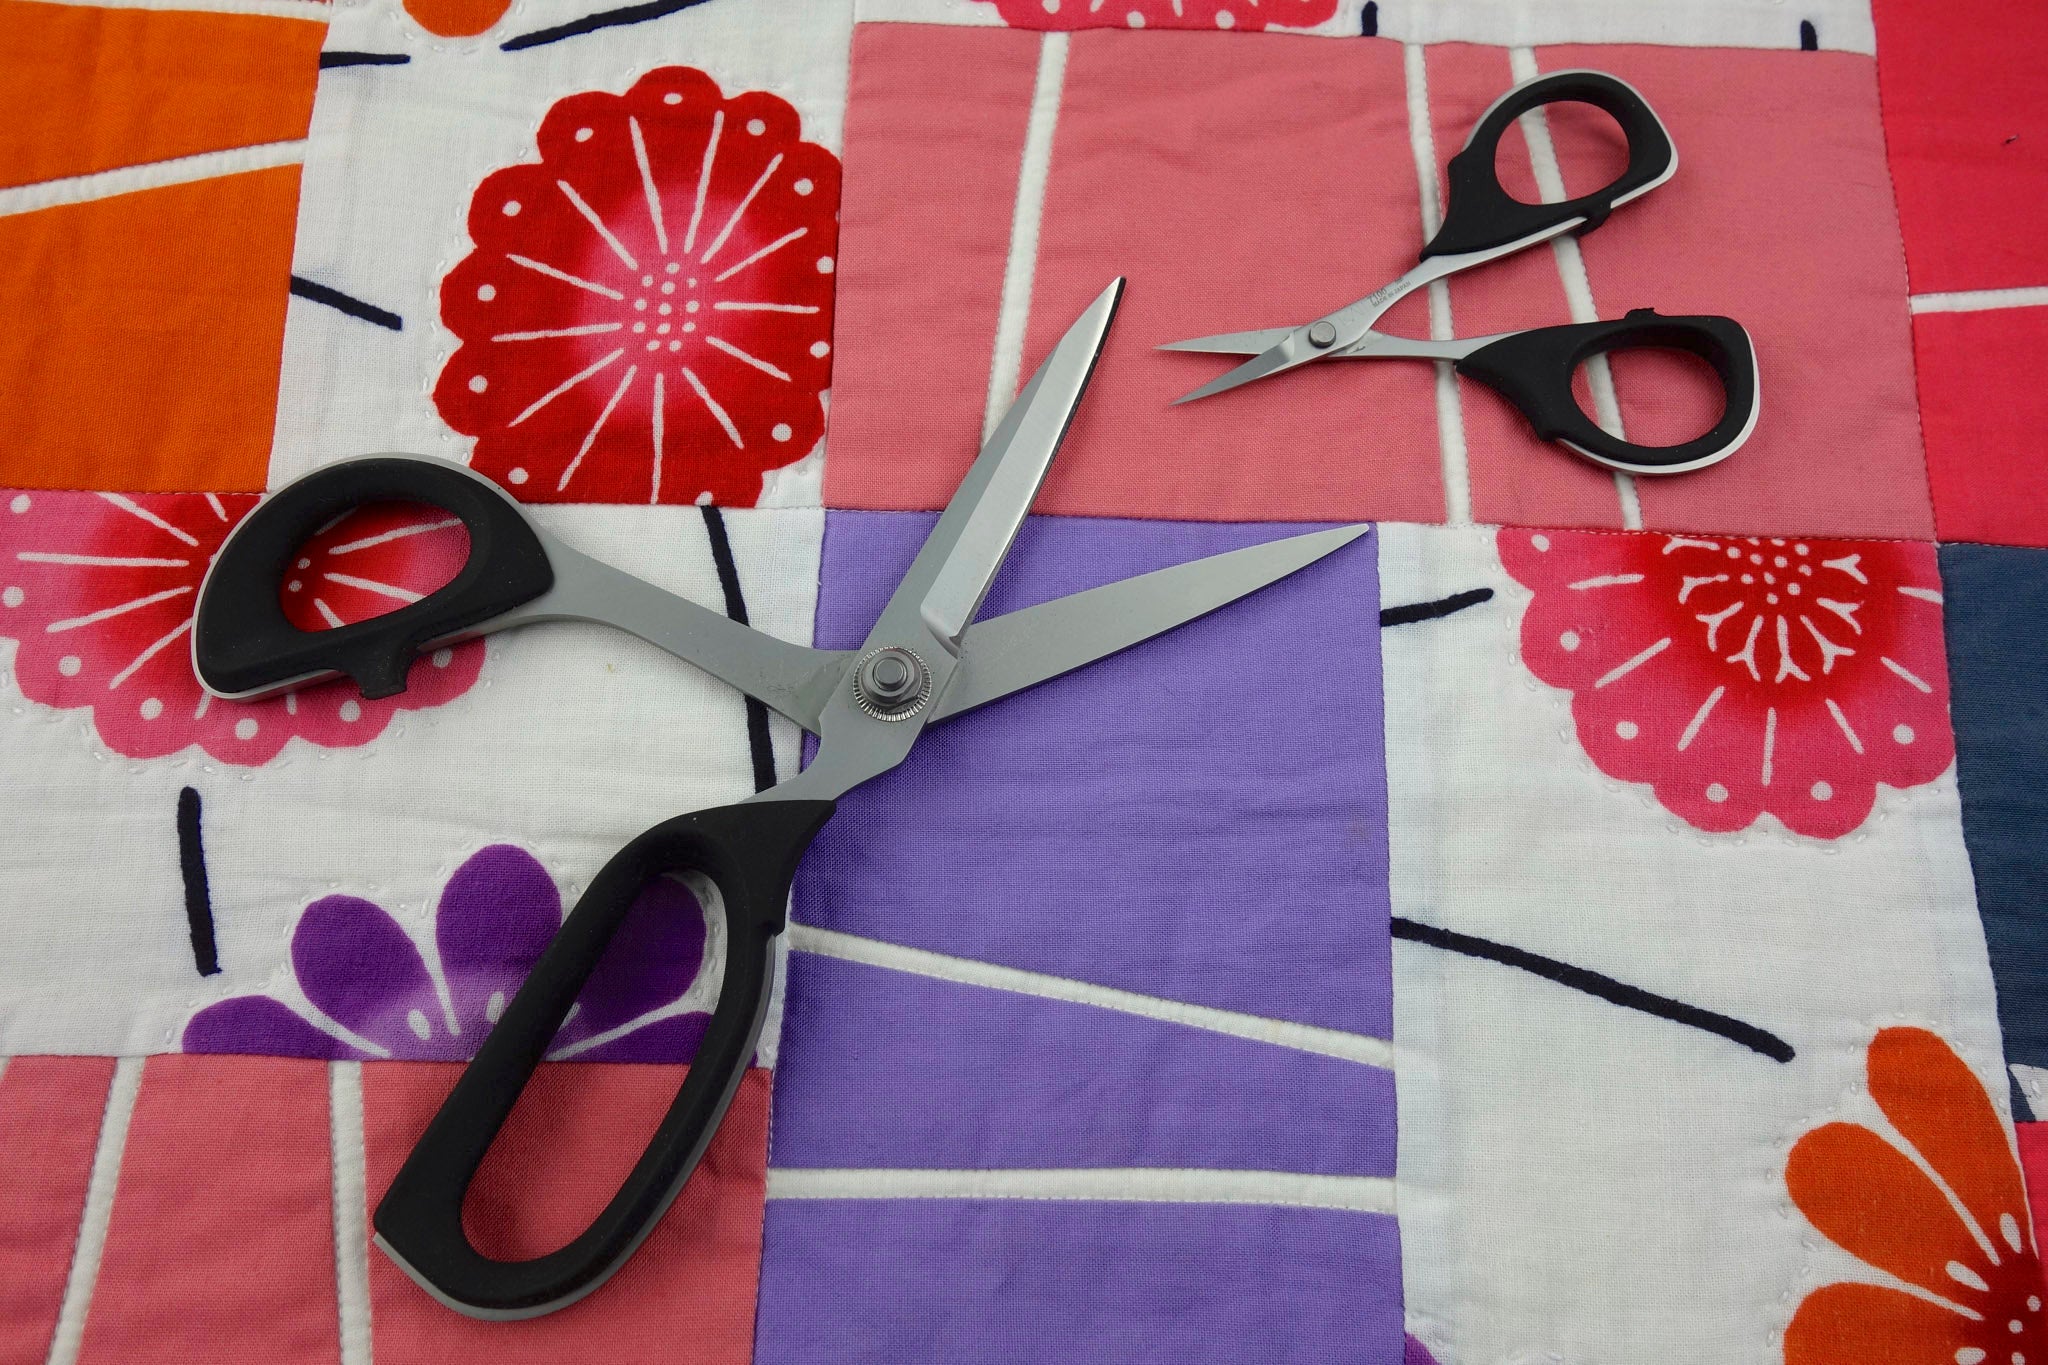 KAI pro shears in the sewing studio of Patricia Belyea